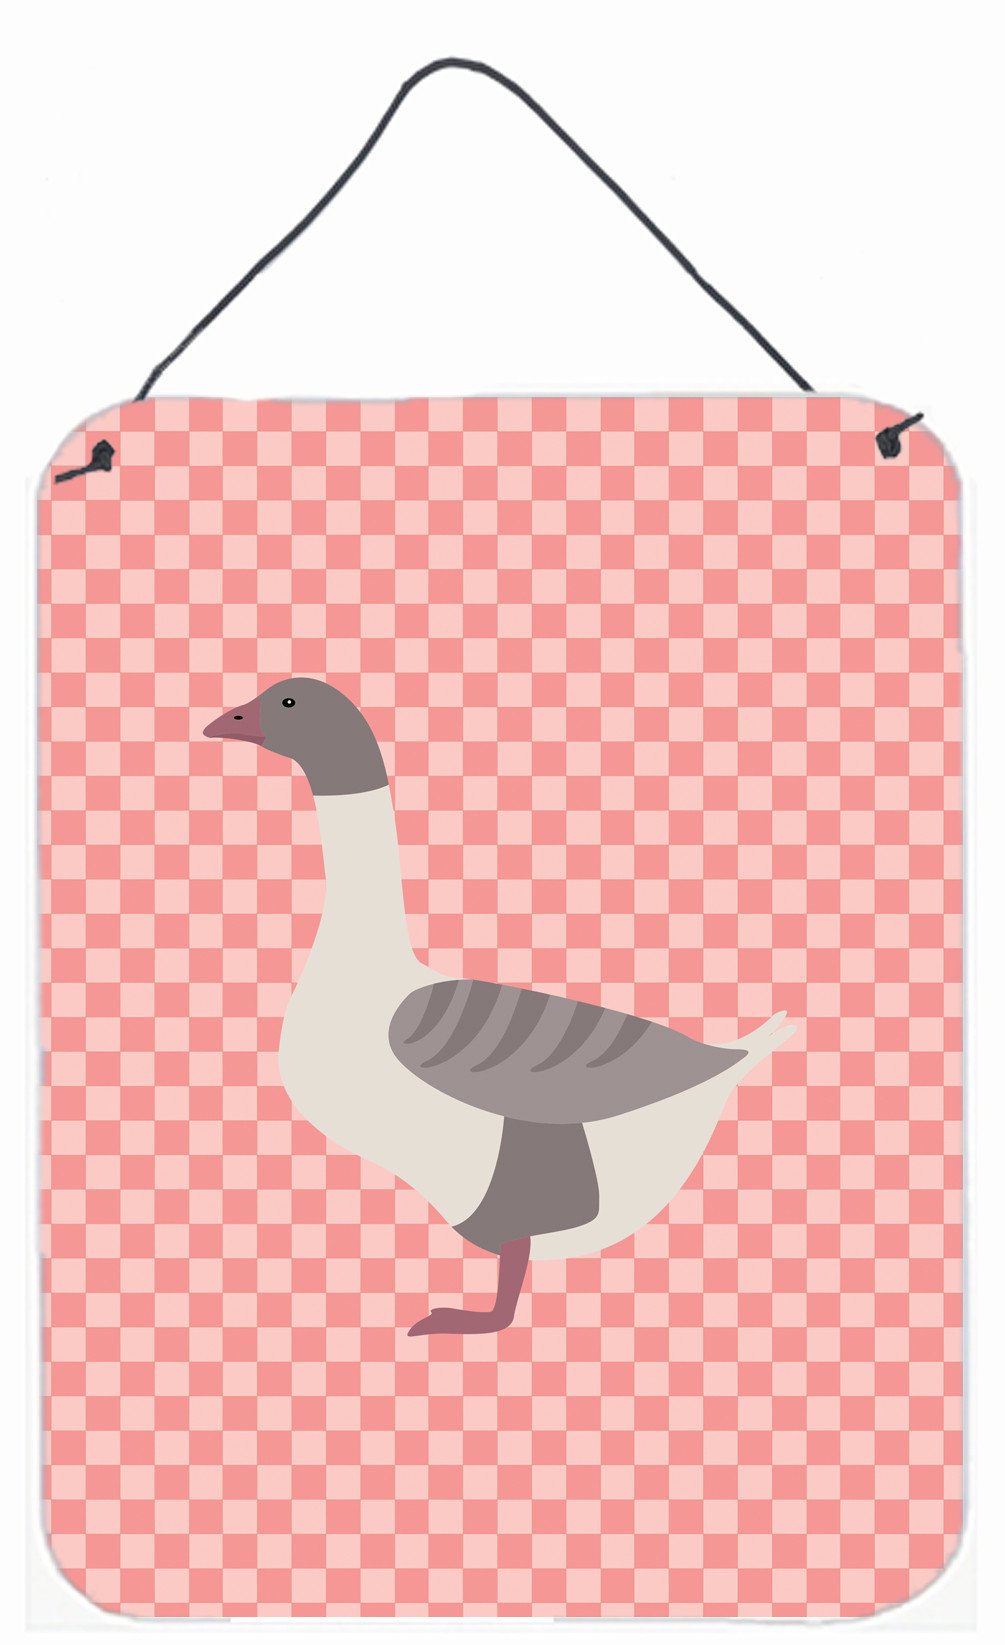 Buff Grey Back Goose Pink Check Wall or Door Hanging Prints BB7901DS1216 by Caroline's Treasures